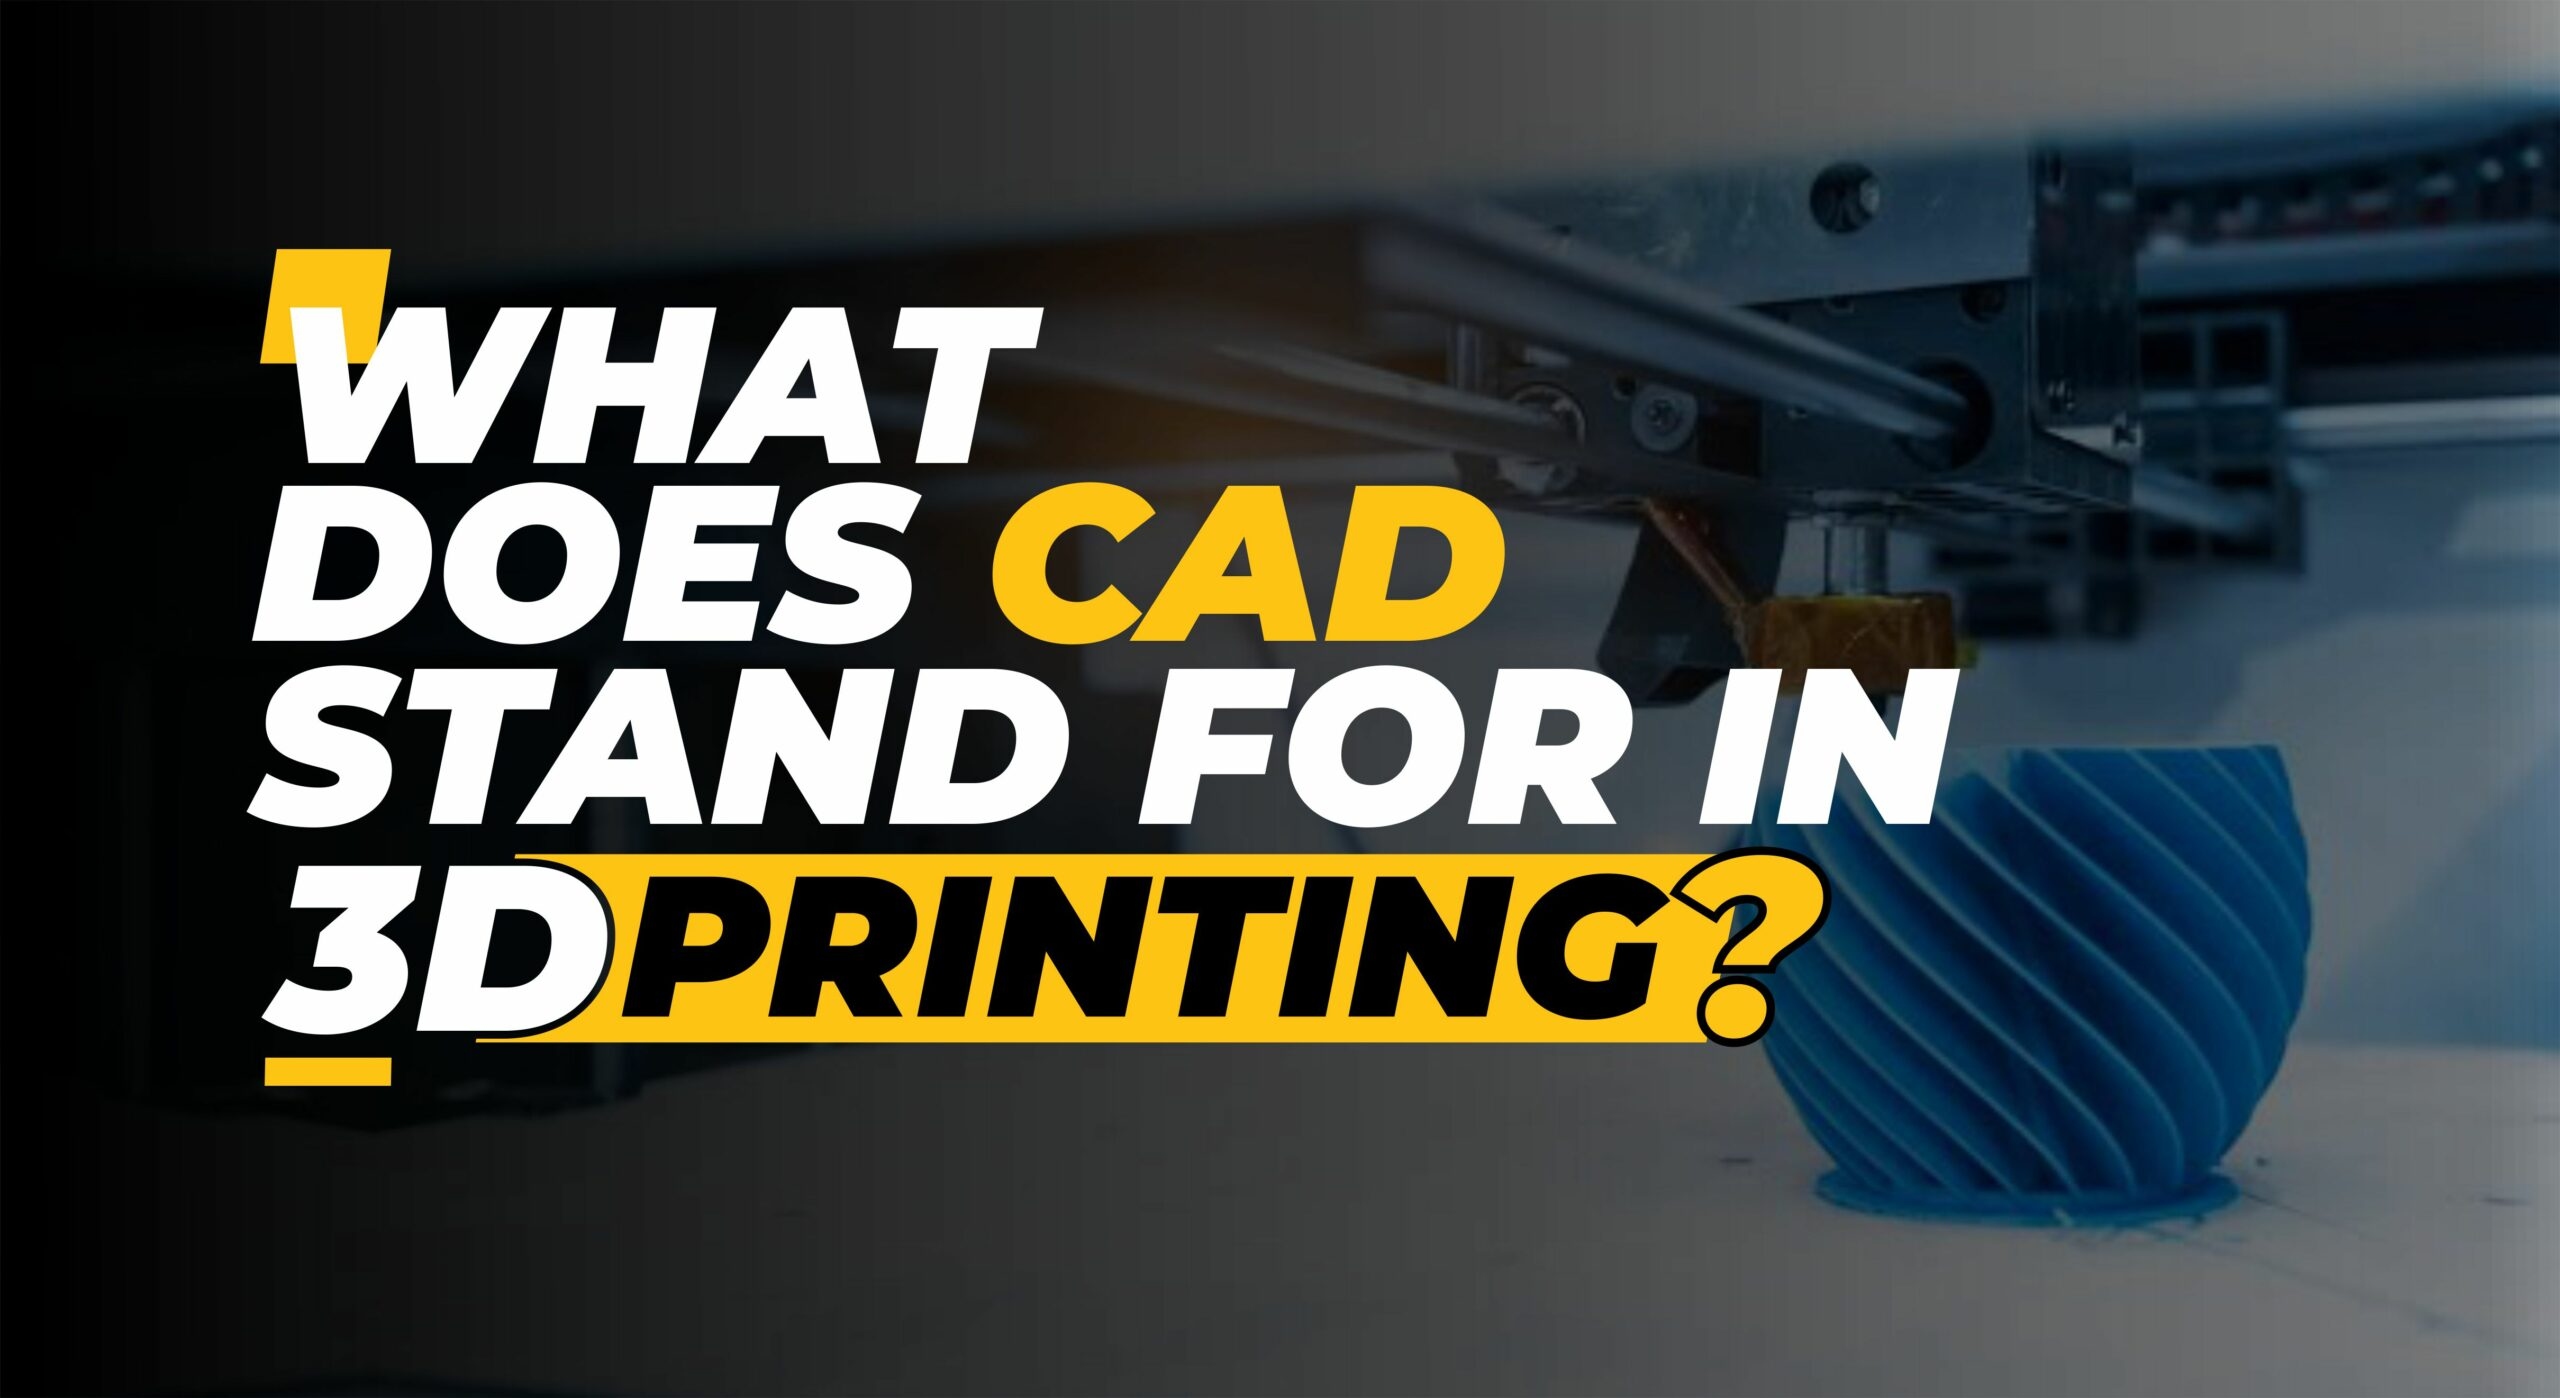 What Does Cad Stand For In 3D Printing